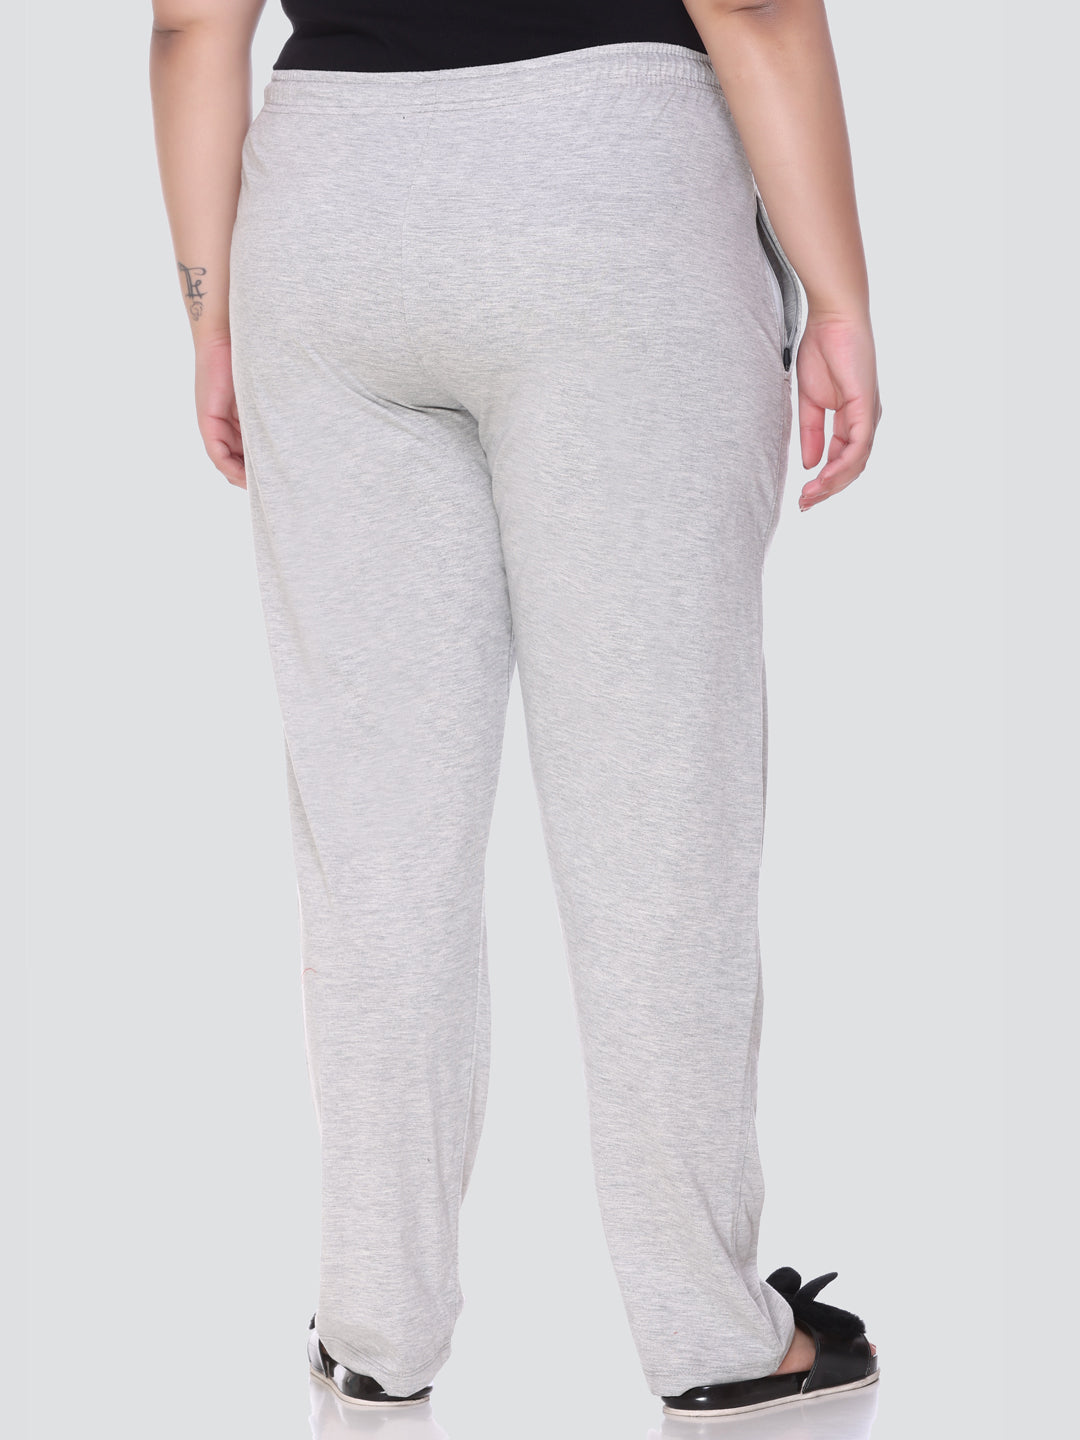 Cotton Track Pants For Women - Grey